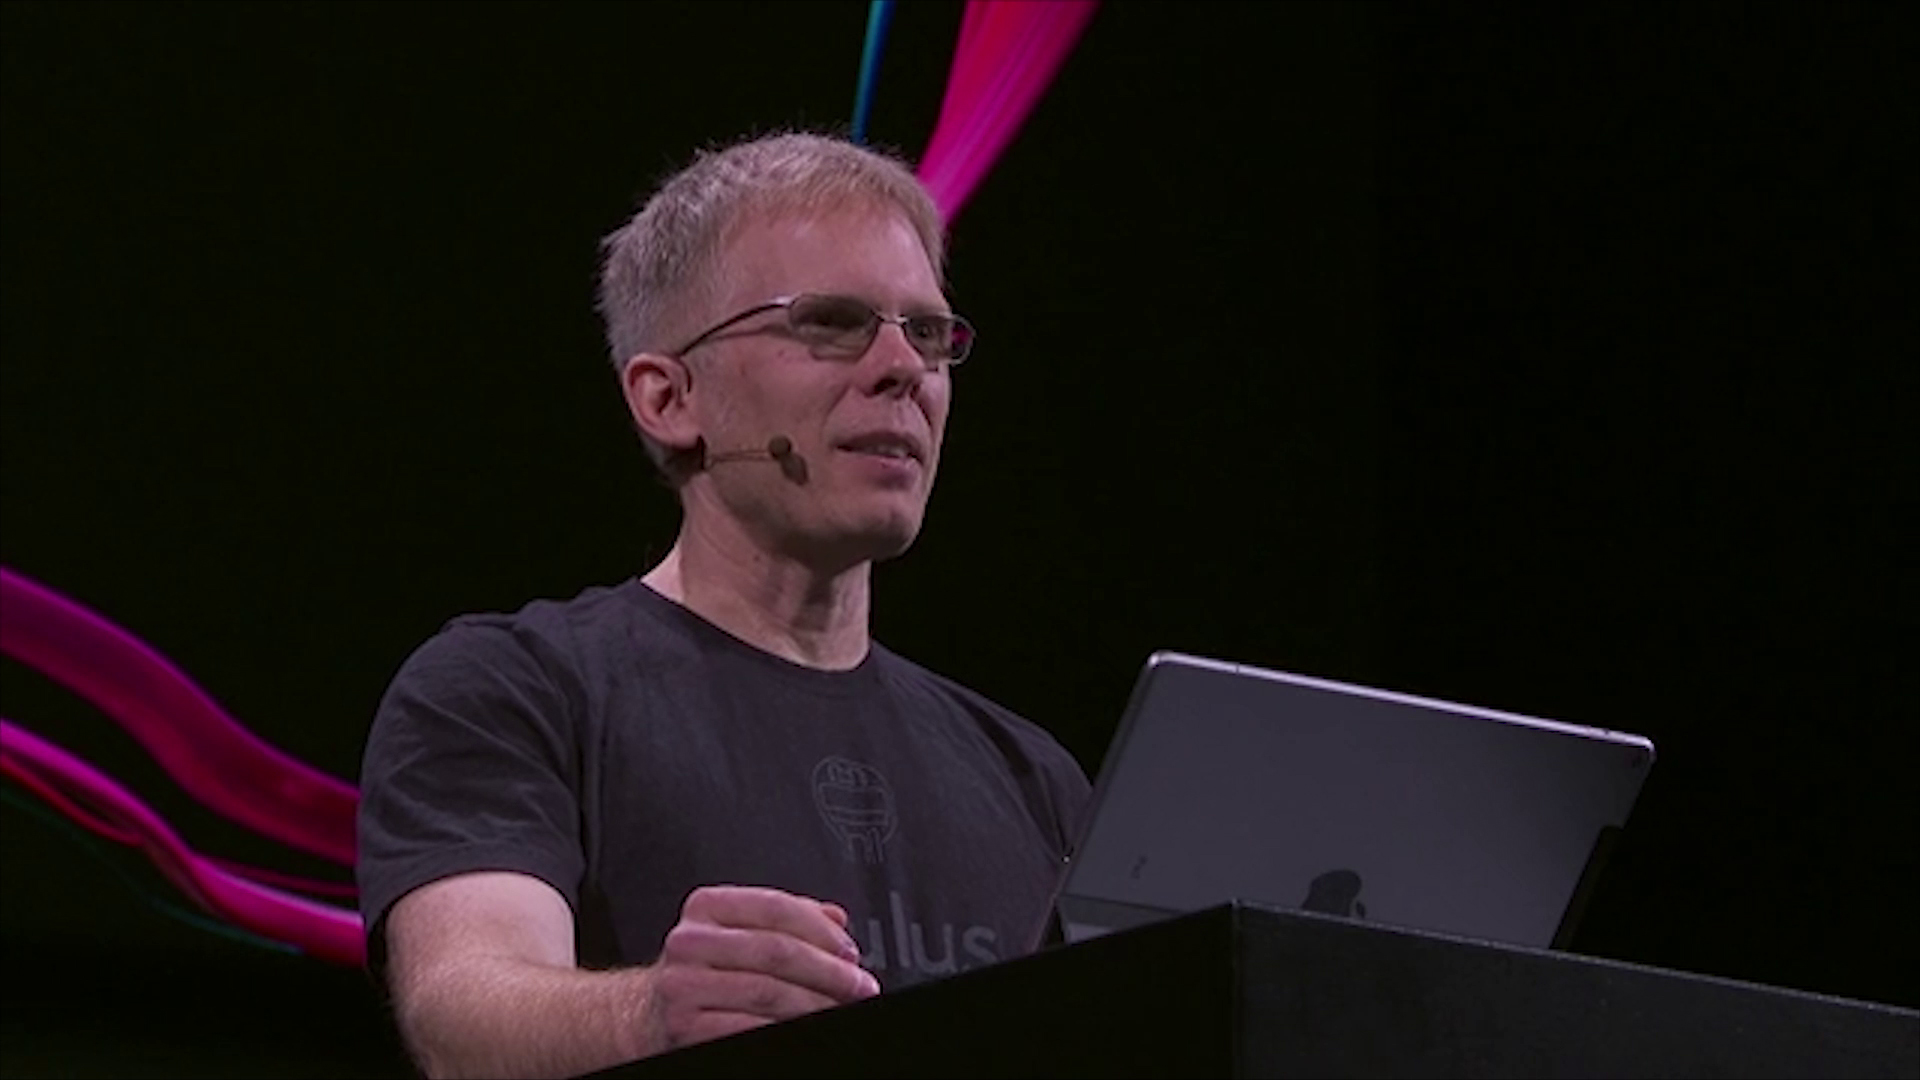 VR Industry Luminary John Carmack Quits Meta, Calling it “the end of my decade in VR” – Road to VR